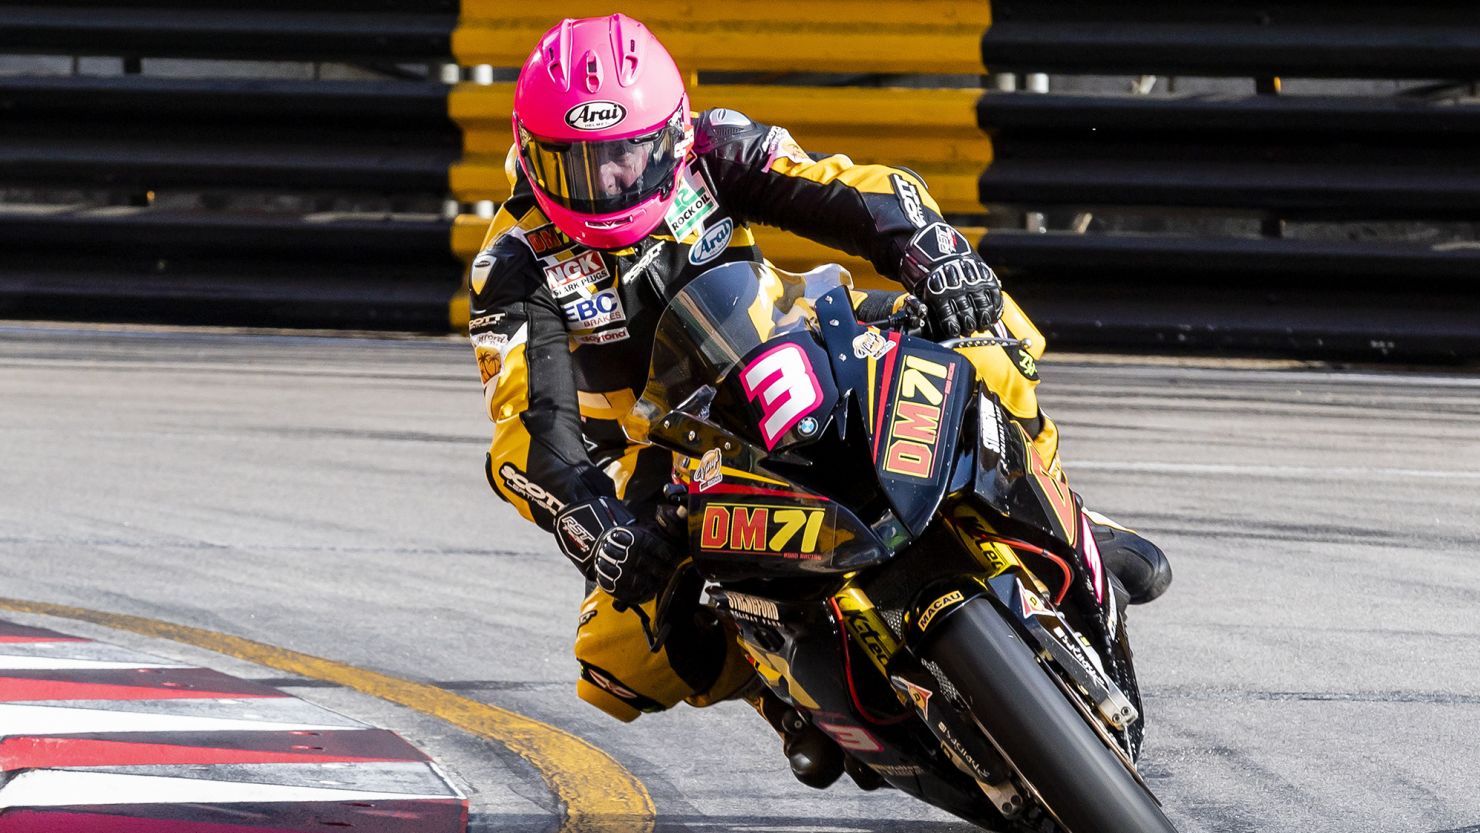 Davy Morgan, driving here at the 66th Macau Grand Prix in 2019, was a veteran competitor. 